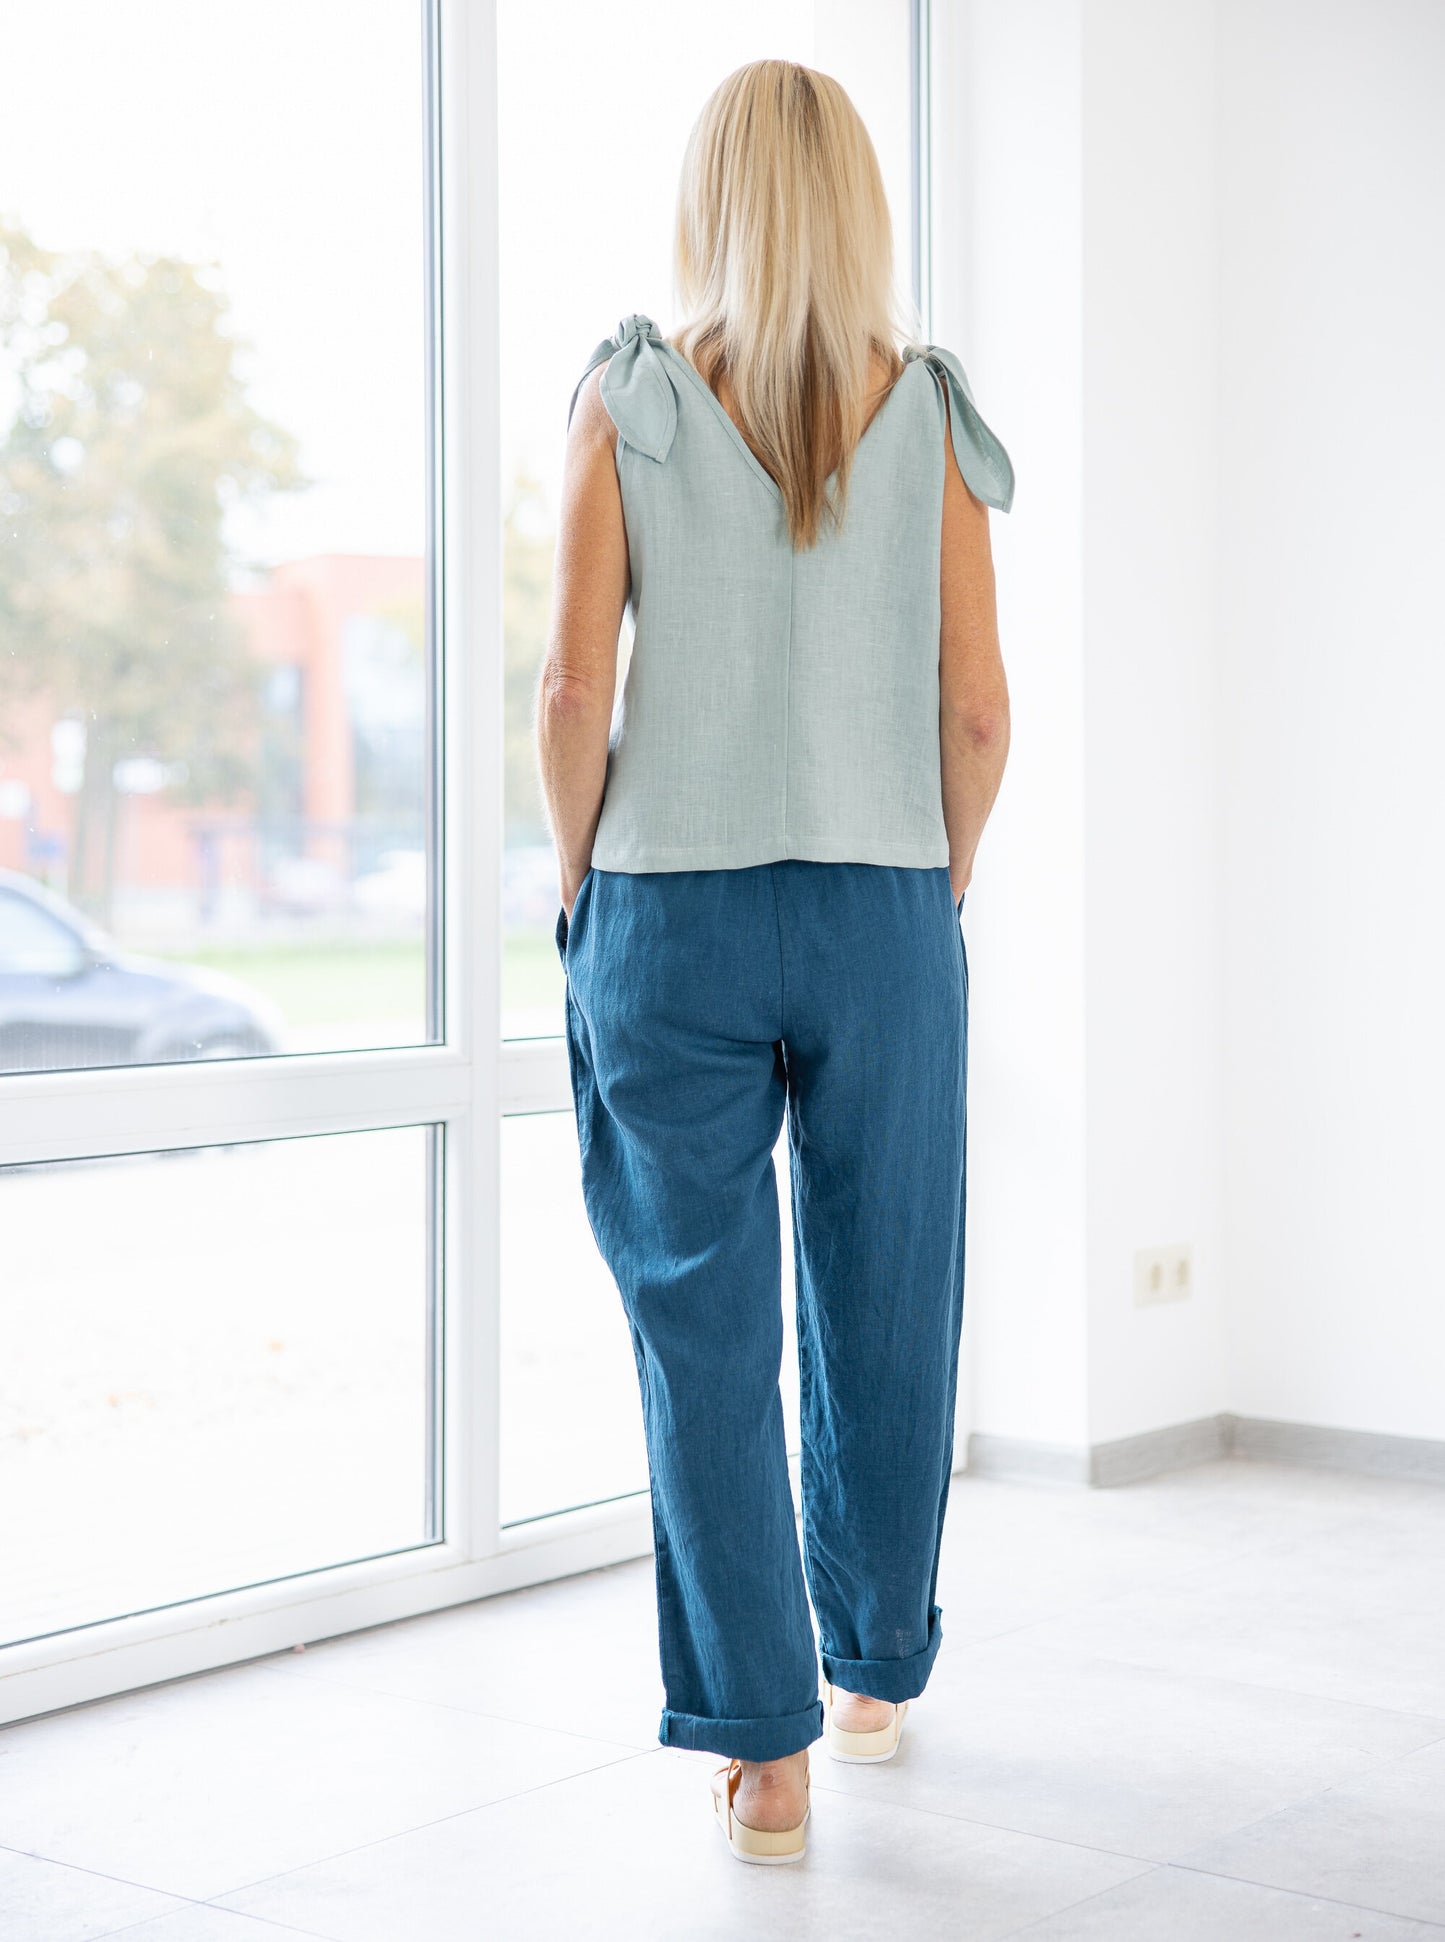 Teal Blue Trousers - Etsy